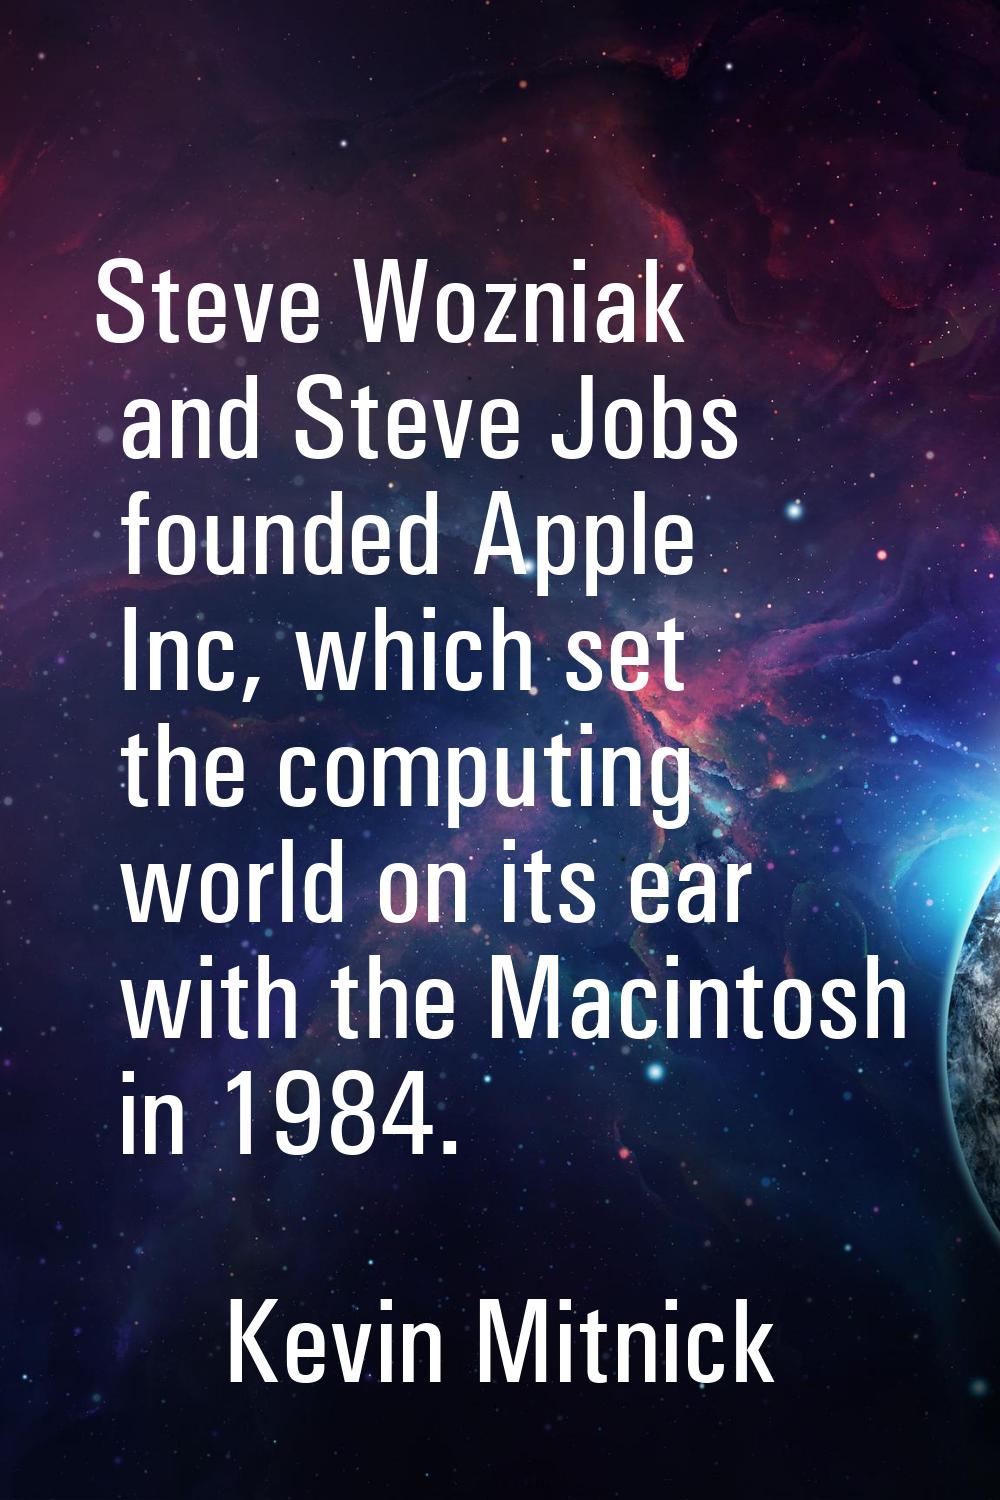 Steve Wozniak and Steve Jobs founded Apple Inc, which set the computing world on its ear with the M